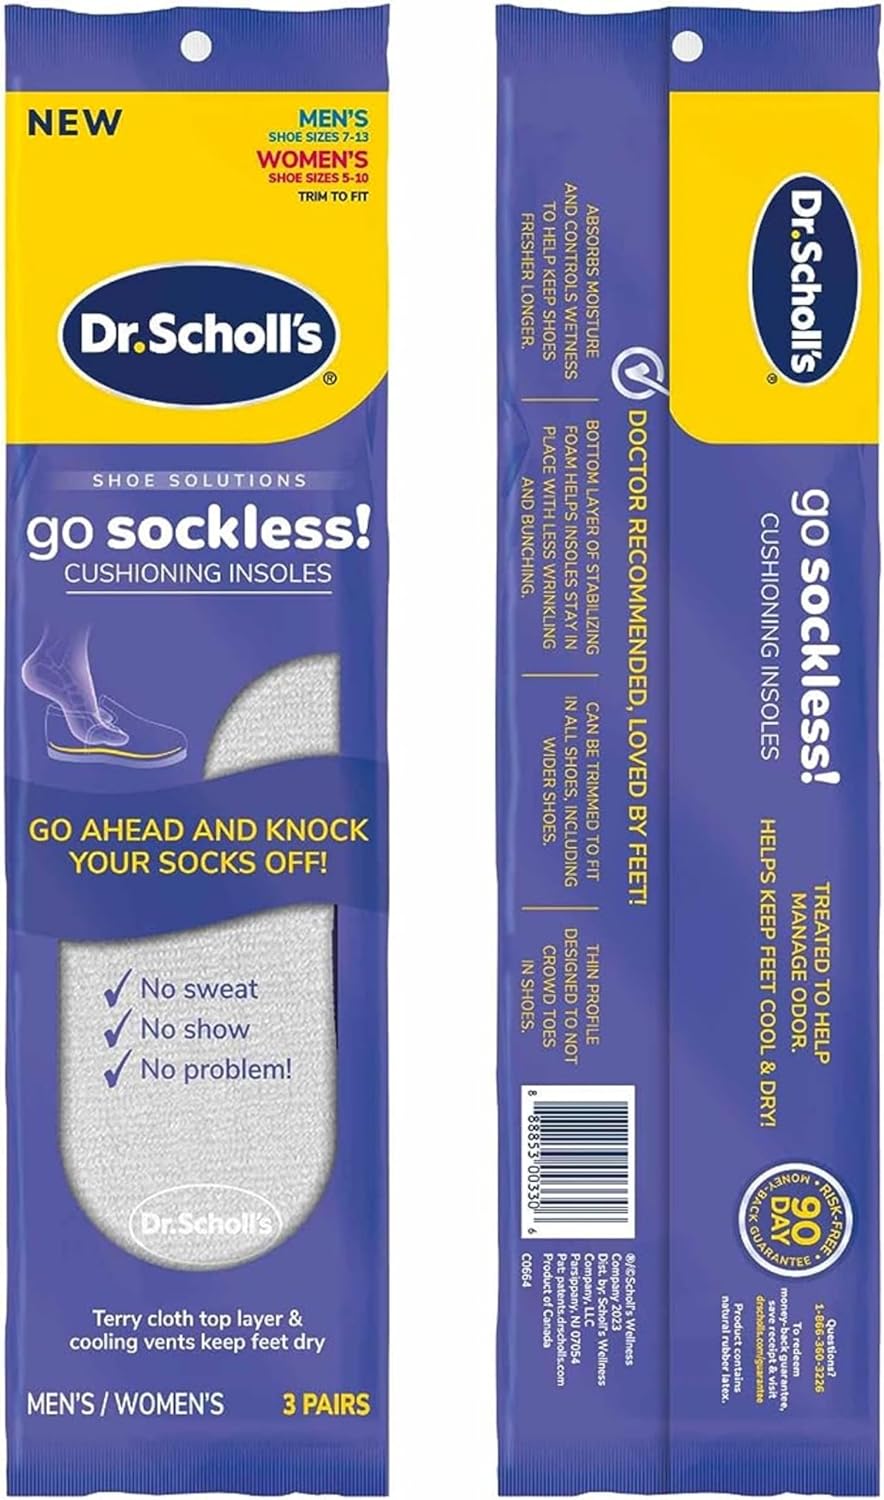 Dr. Scholls Go Sockless! Cushioning Insoles, Unisex, 3 Pairs, Trim to Fit Inserts